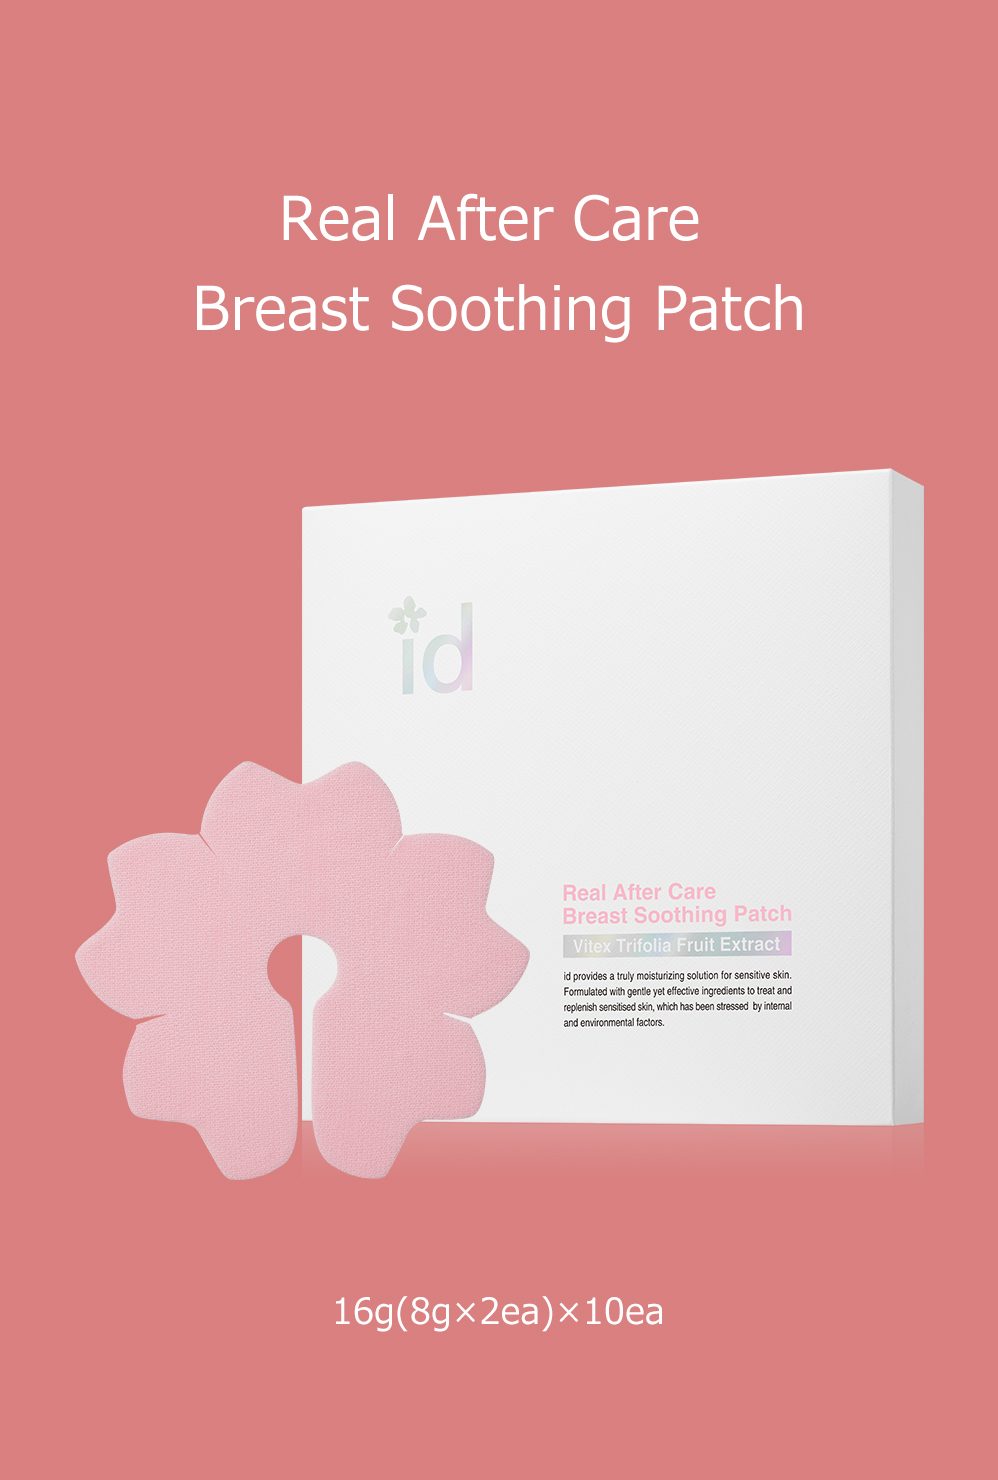 RealAfterCare_BreastSoothingPatch_01